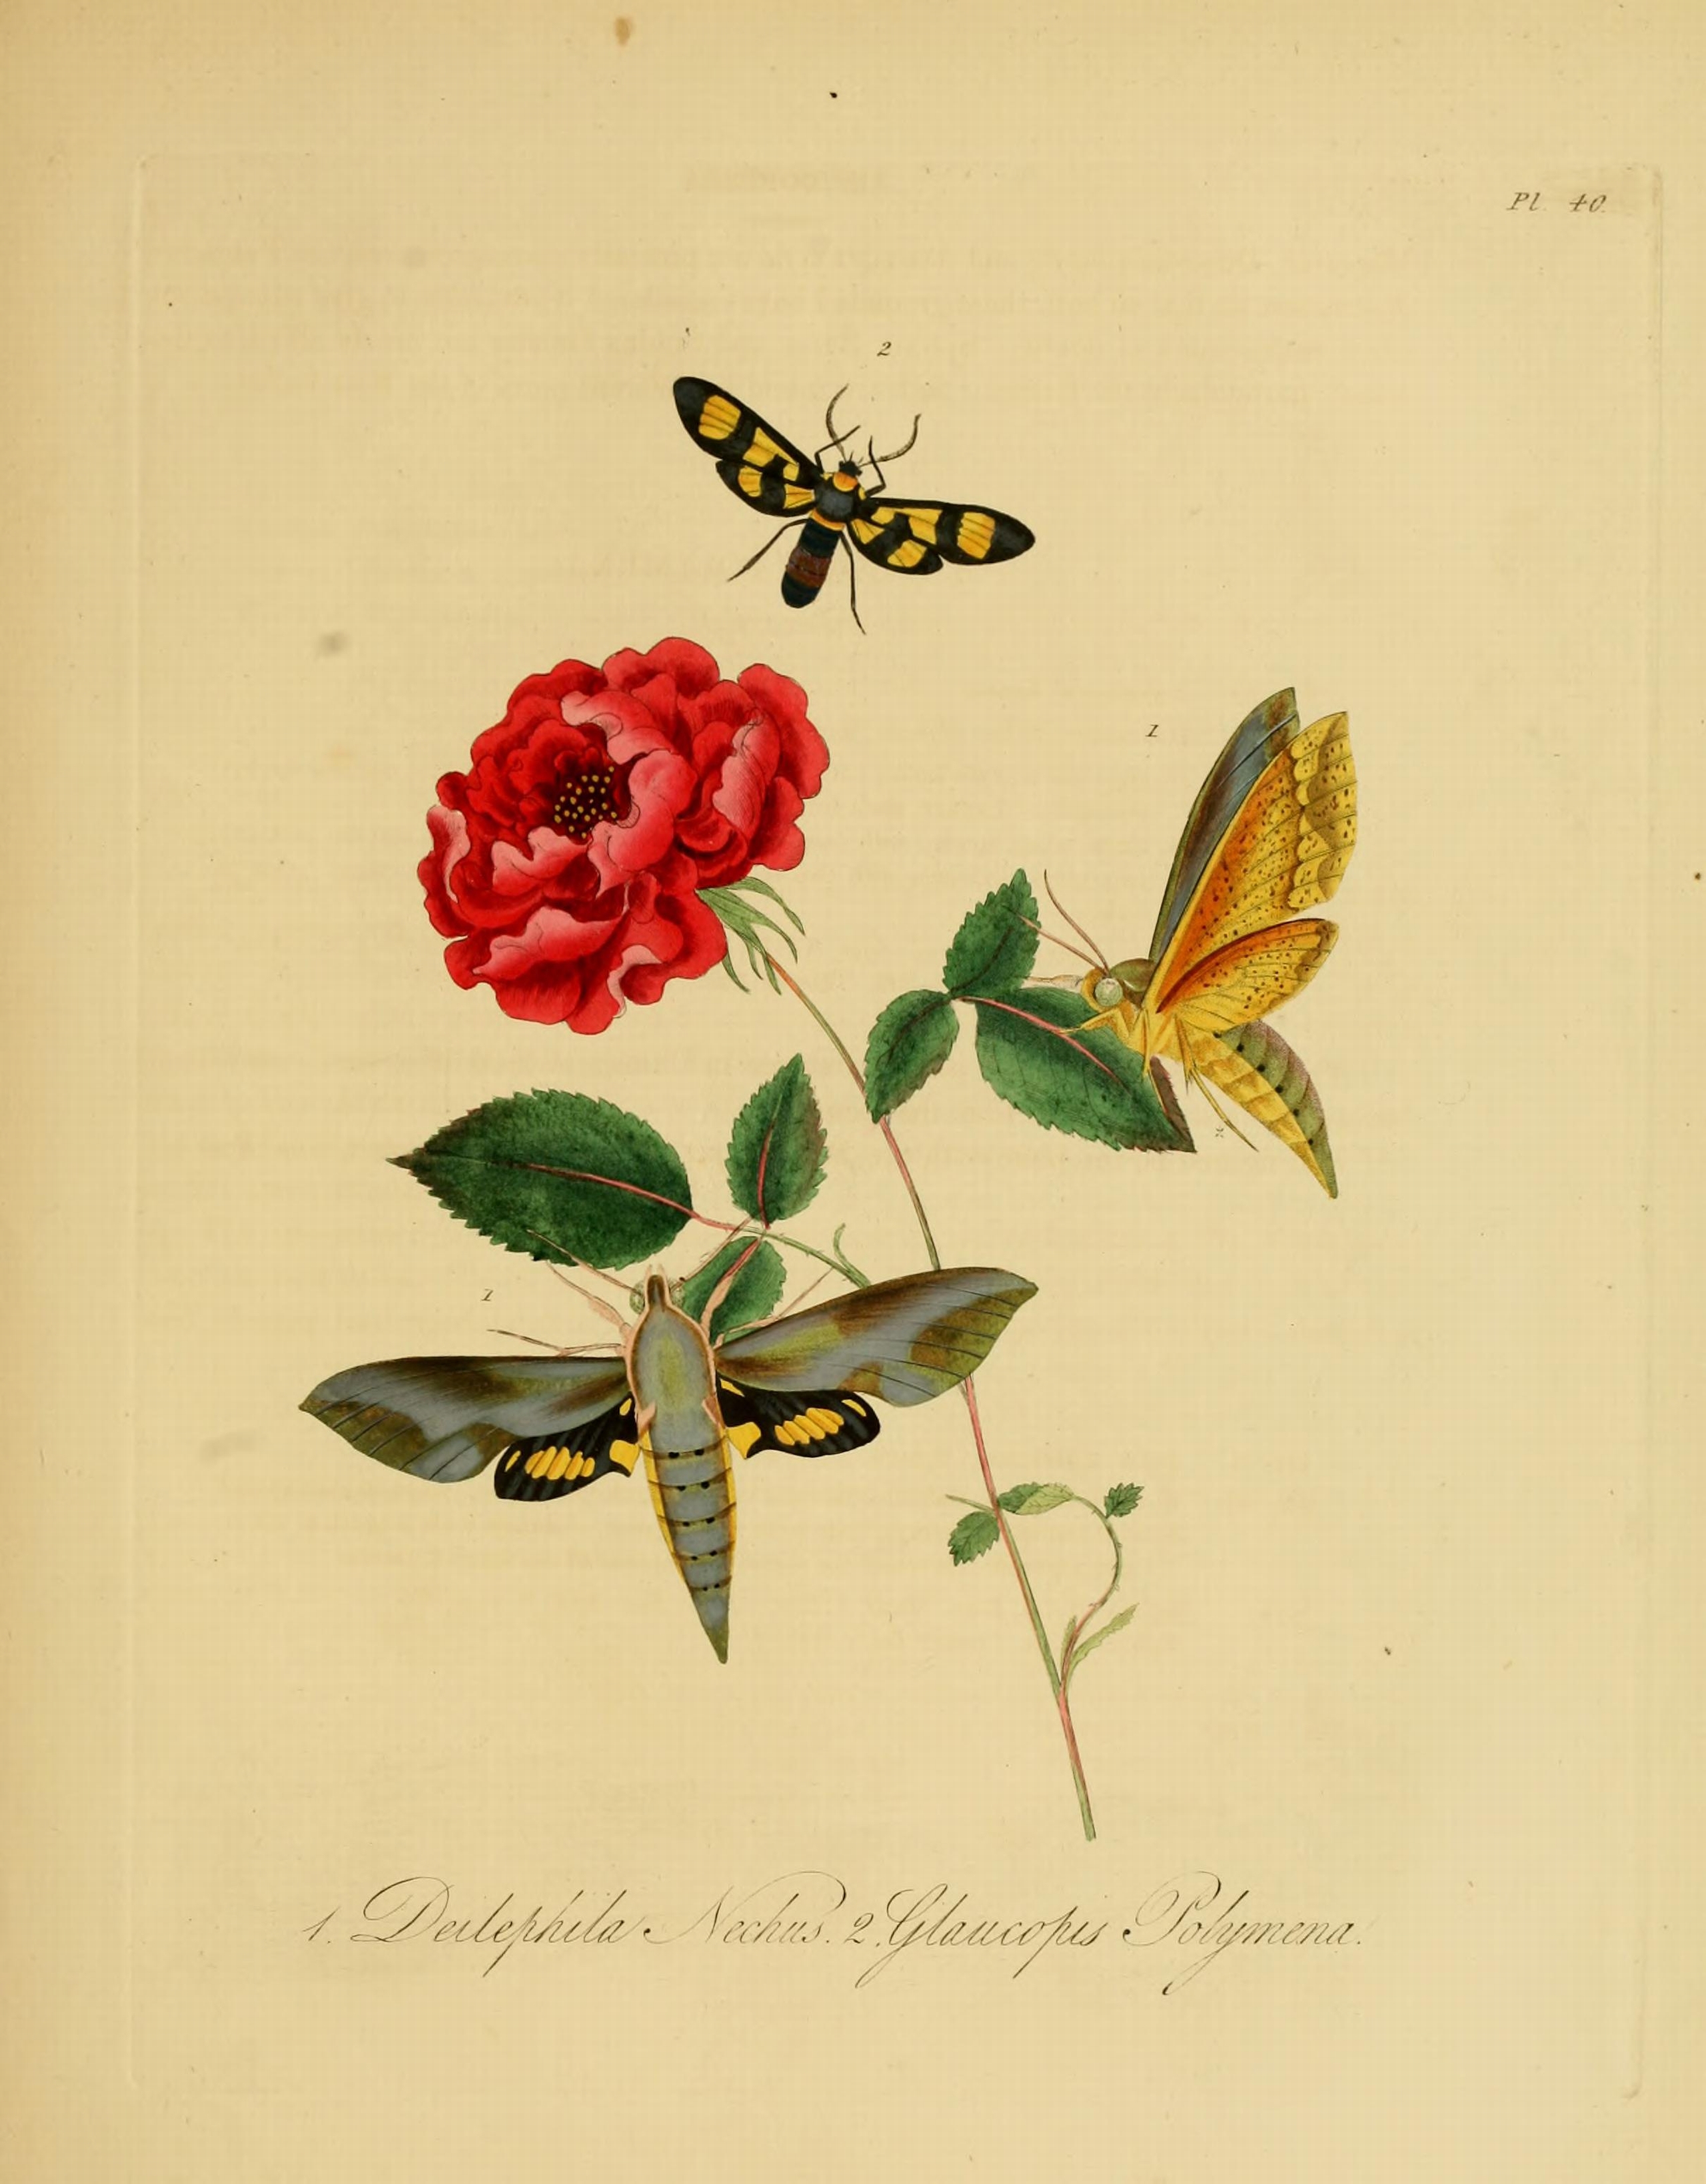 Donovan - Insects of China, 1838 - pl 40